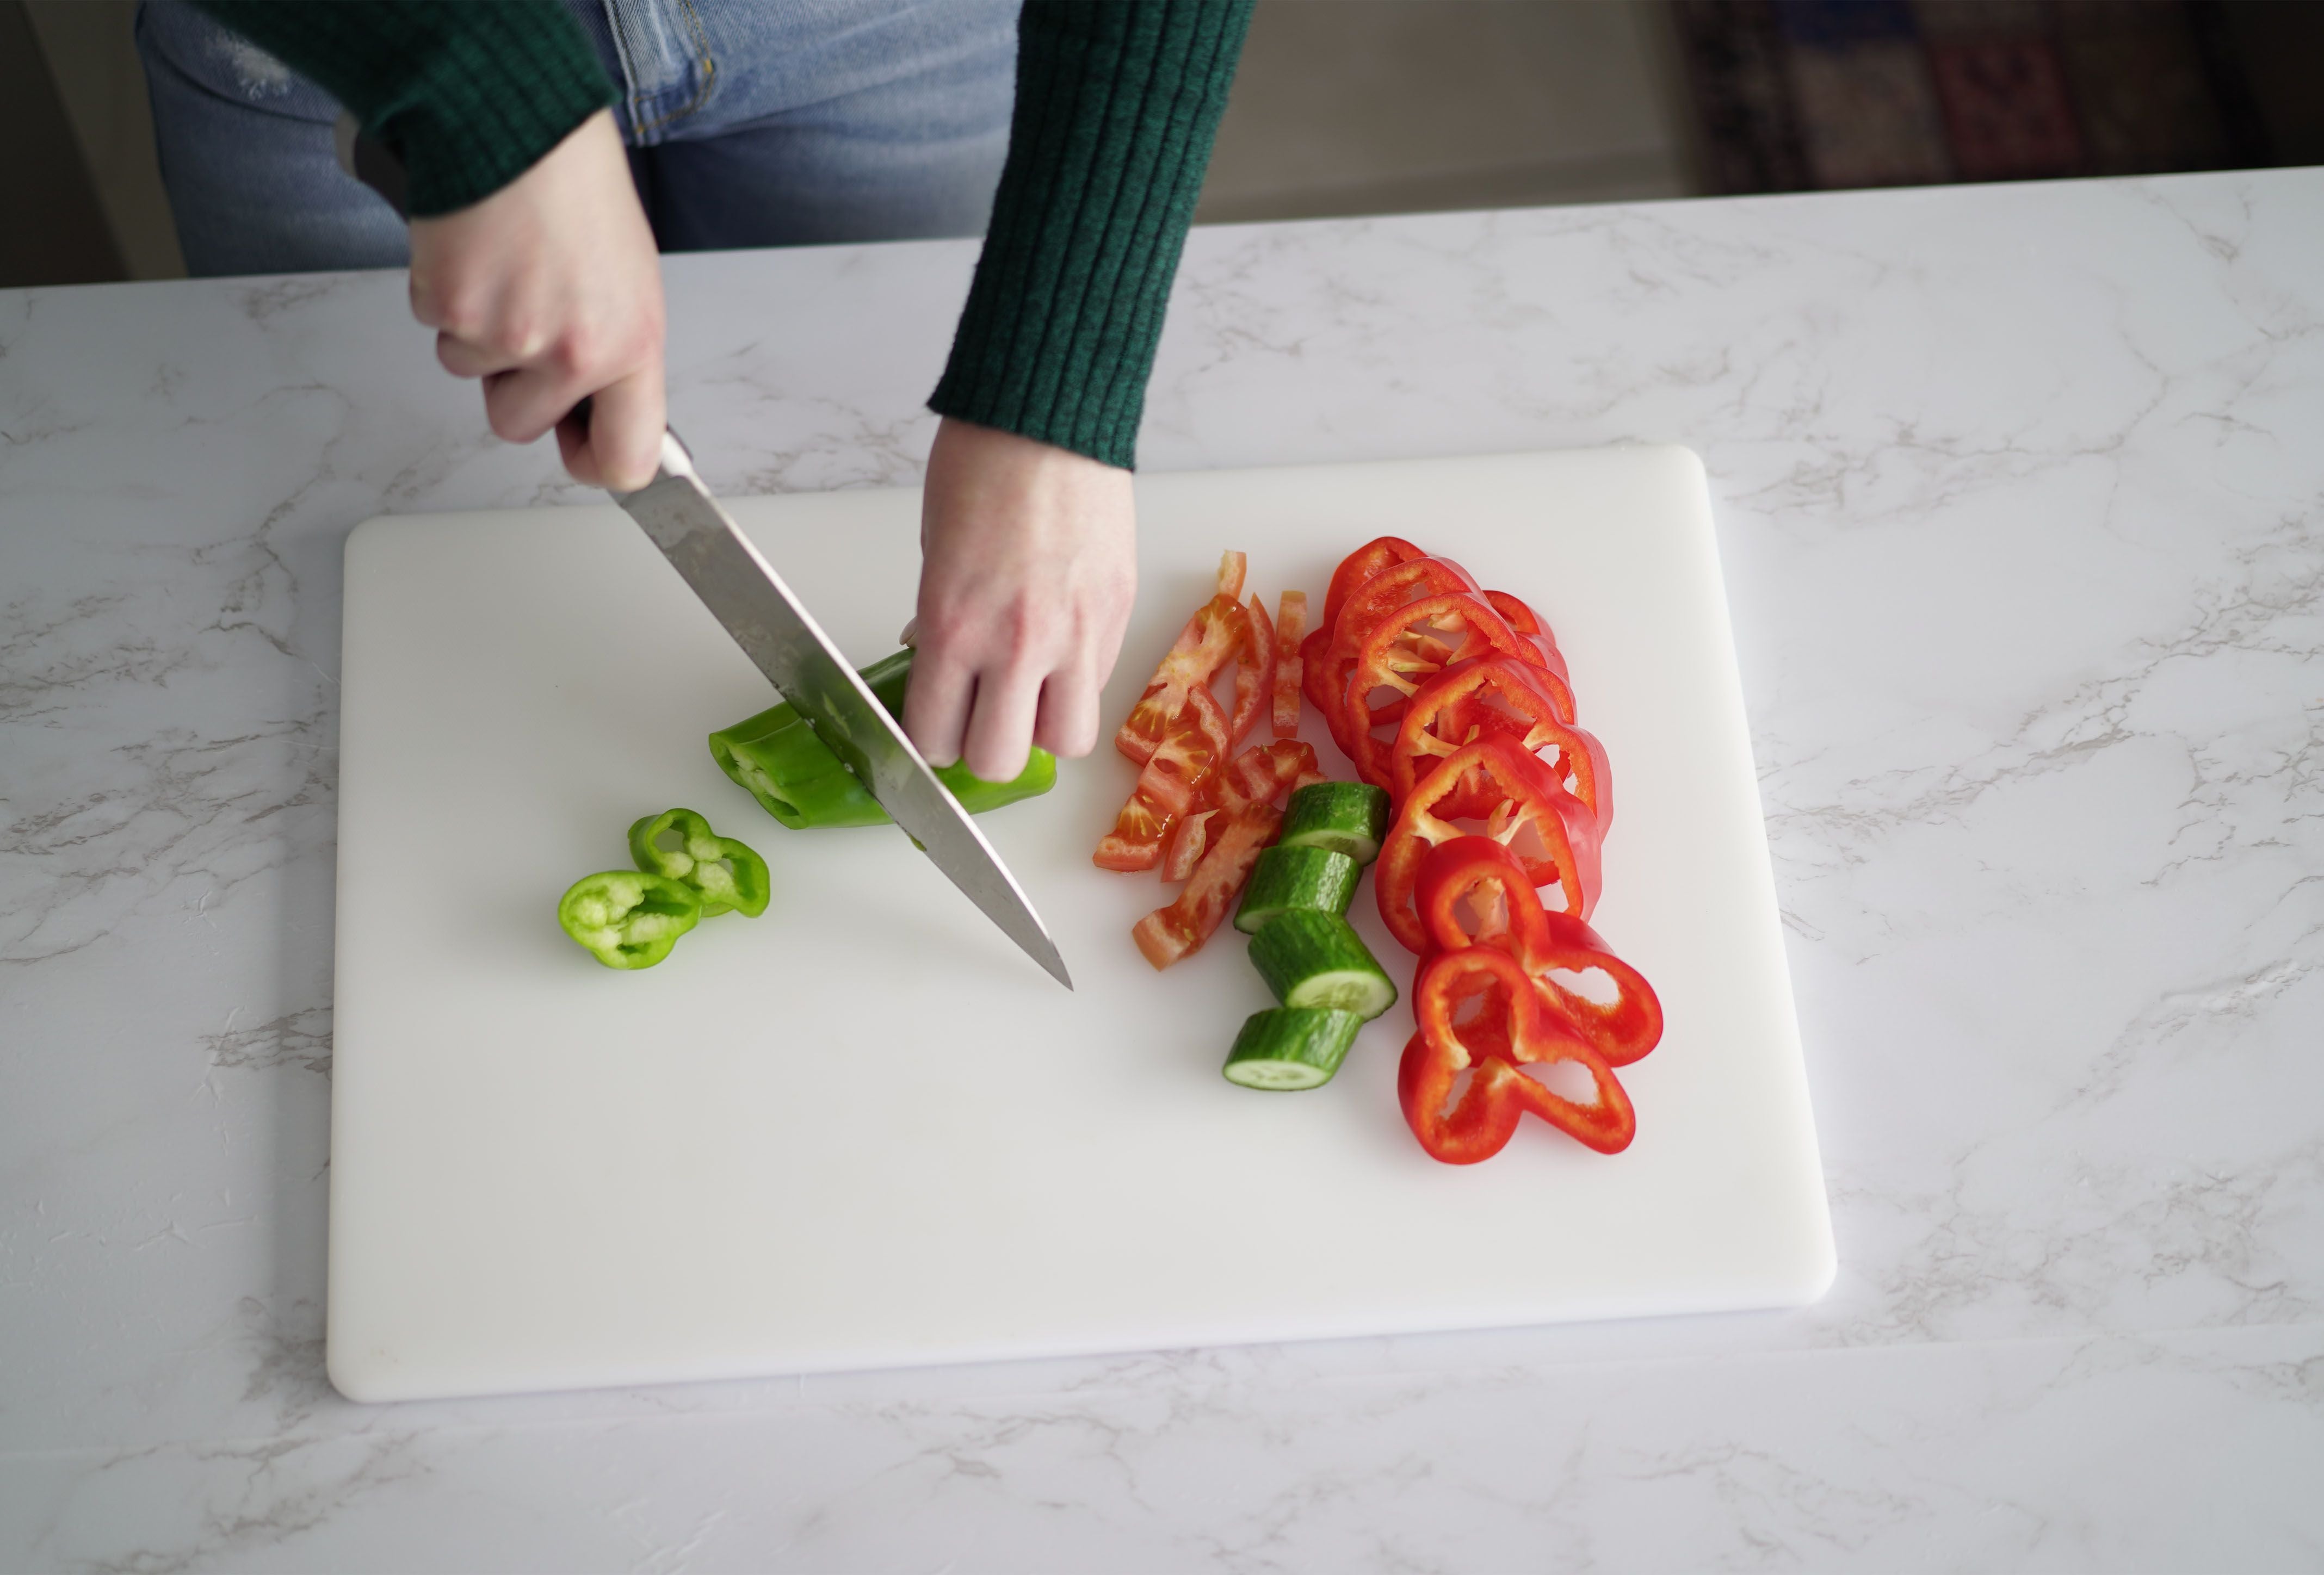 Tap Plastics Cutting Boards HDPE Sheets | Cut-to-Size | Textured White